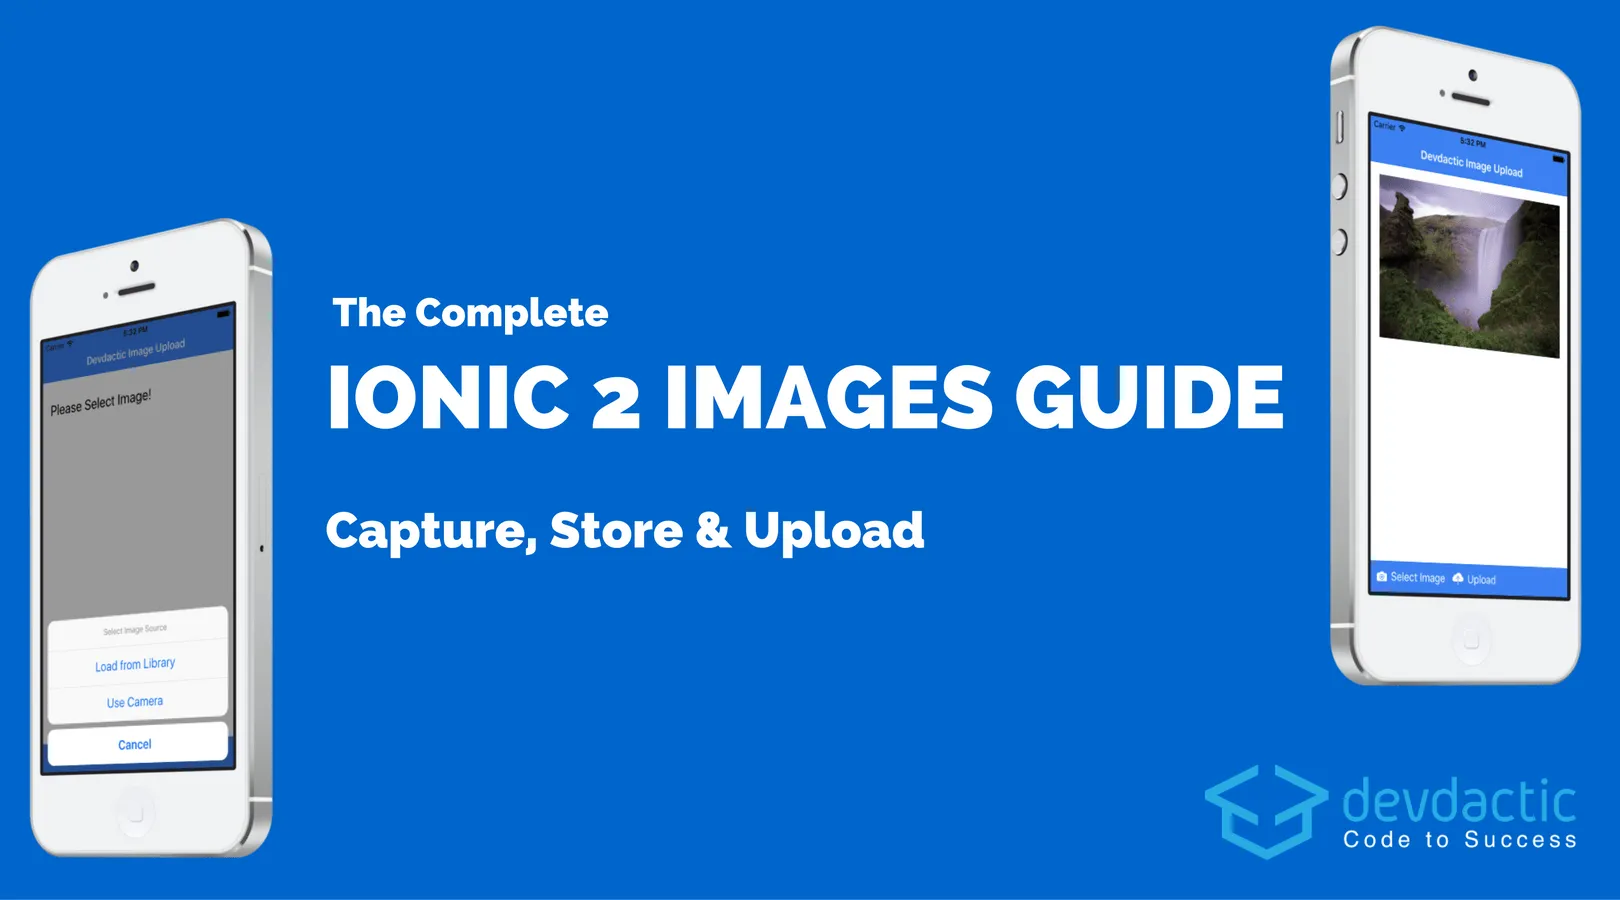 The Complete Ionic Images Guide (Capture, Store & Upload)